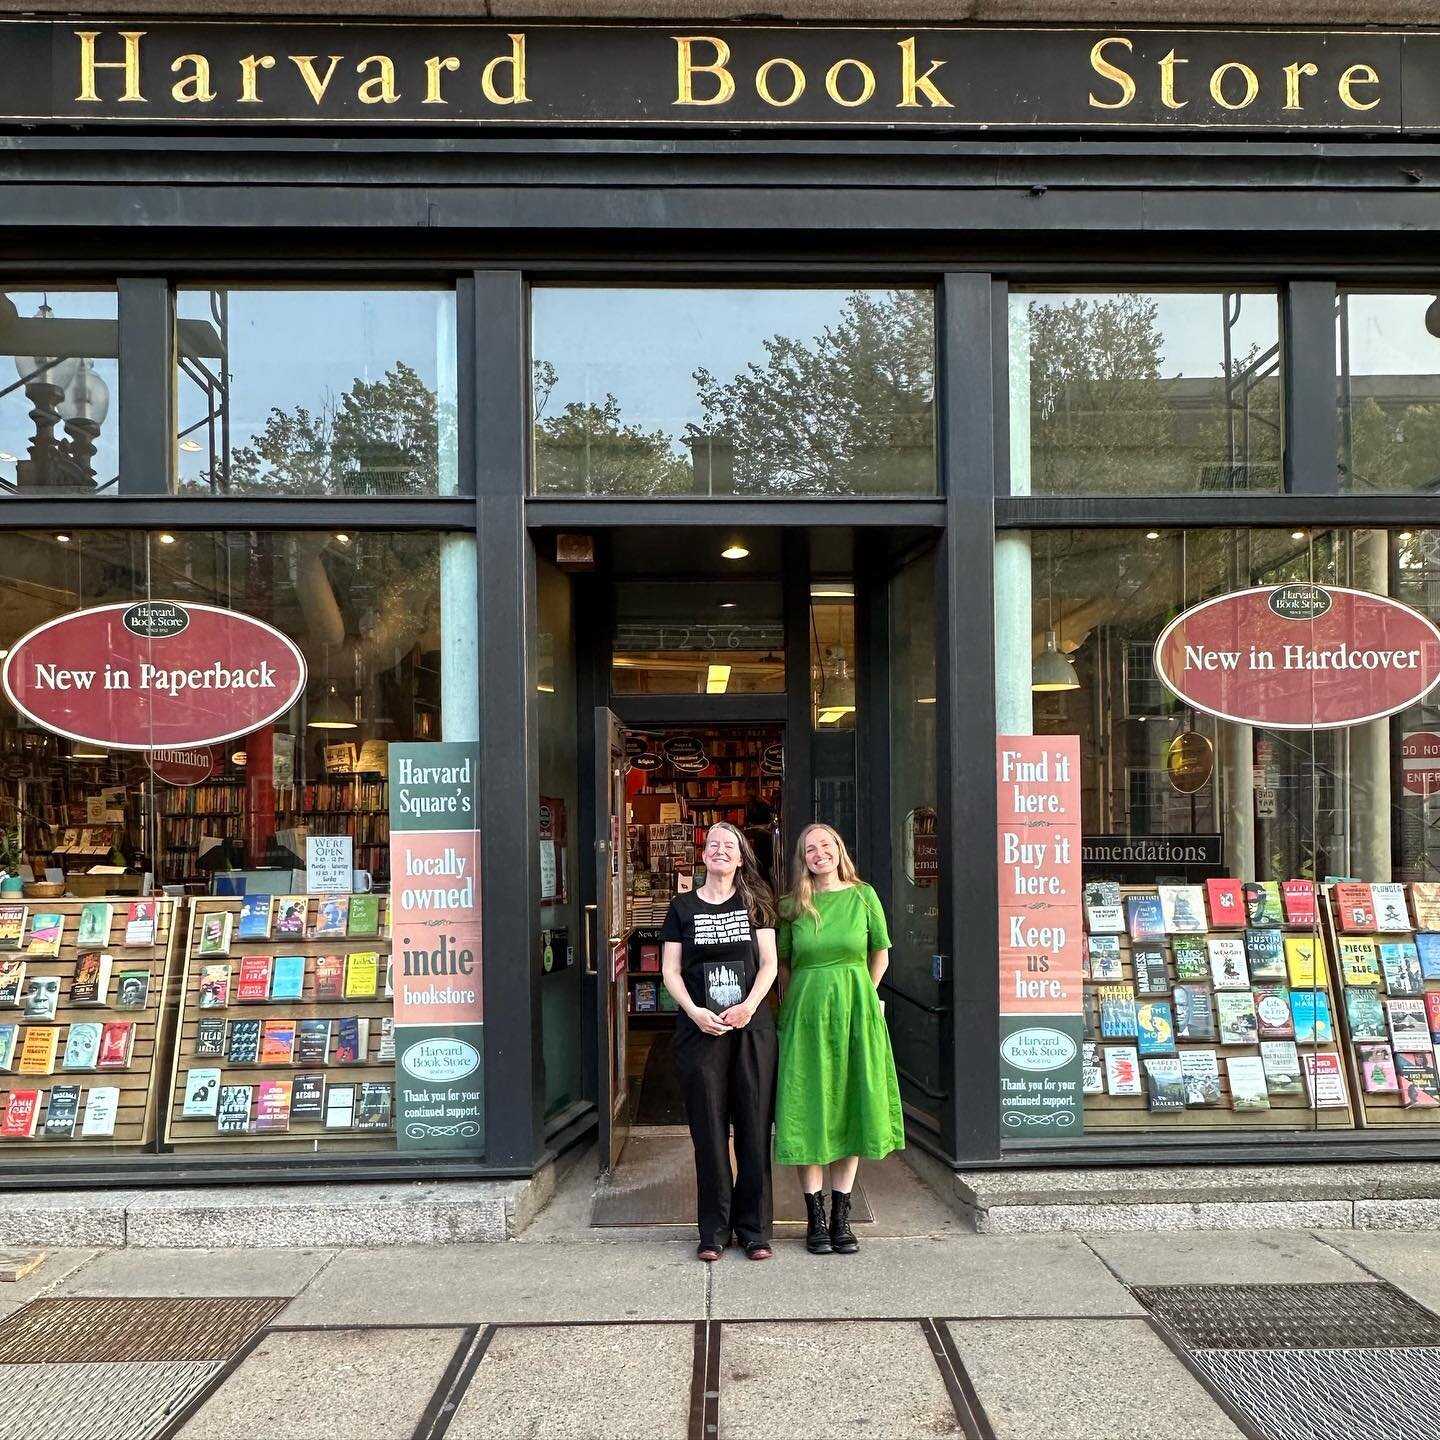 Thank you to everyone who joined us last night at the Harvard Book Store to celebrate THE LANGUAGE OF TREES. 🙏

The heat triggered my #Dysautonomia so I was a little slow, but I loved chatting with @oroeoboeococoao ☺️🙌🌳
THANK YOU! 

NEXT STOP: Bac